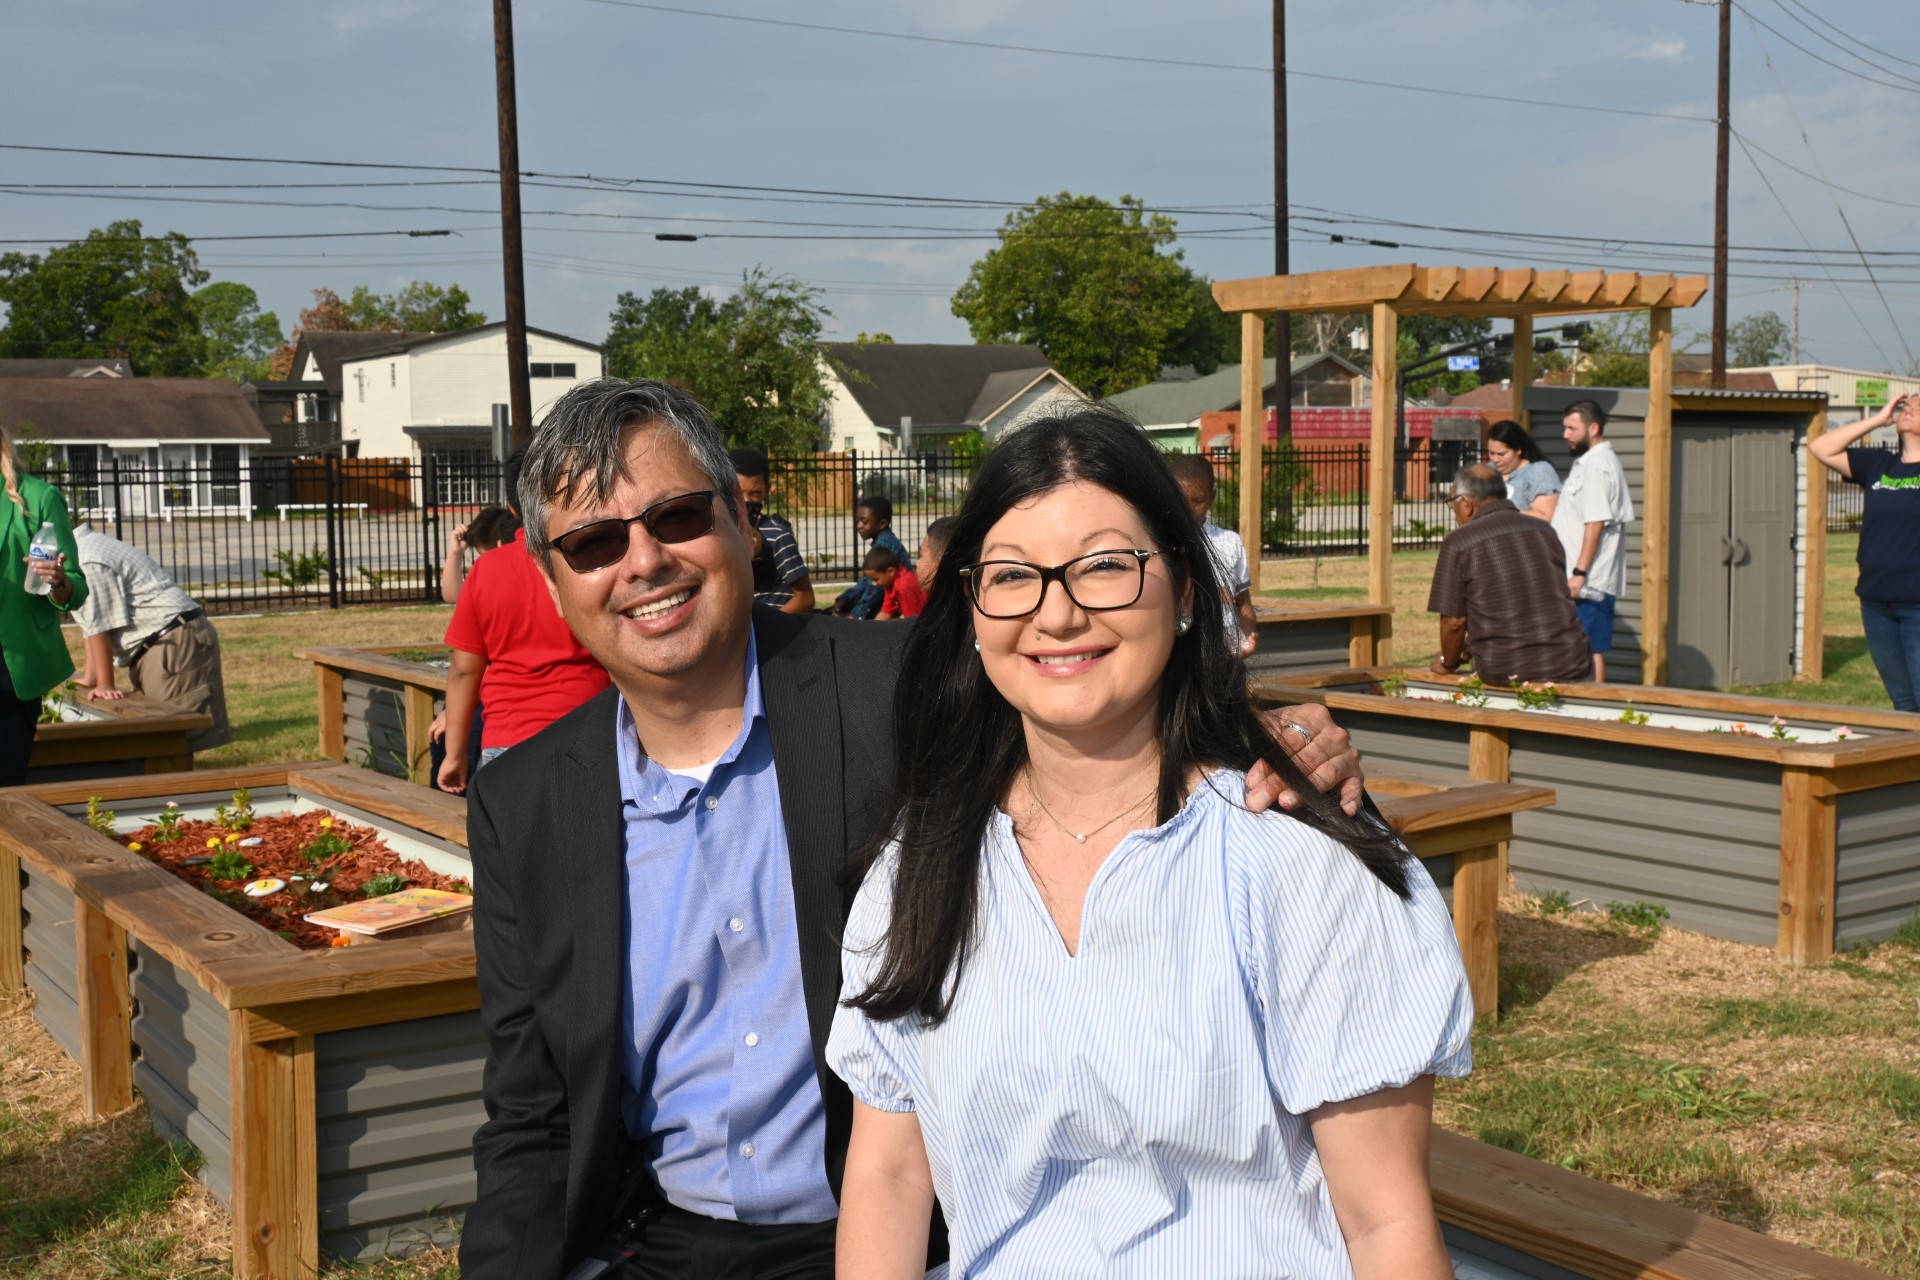 Luis Munoz and sister pose in front of PIE donated garden